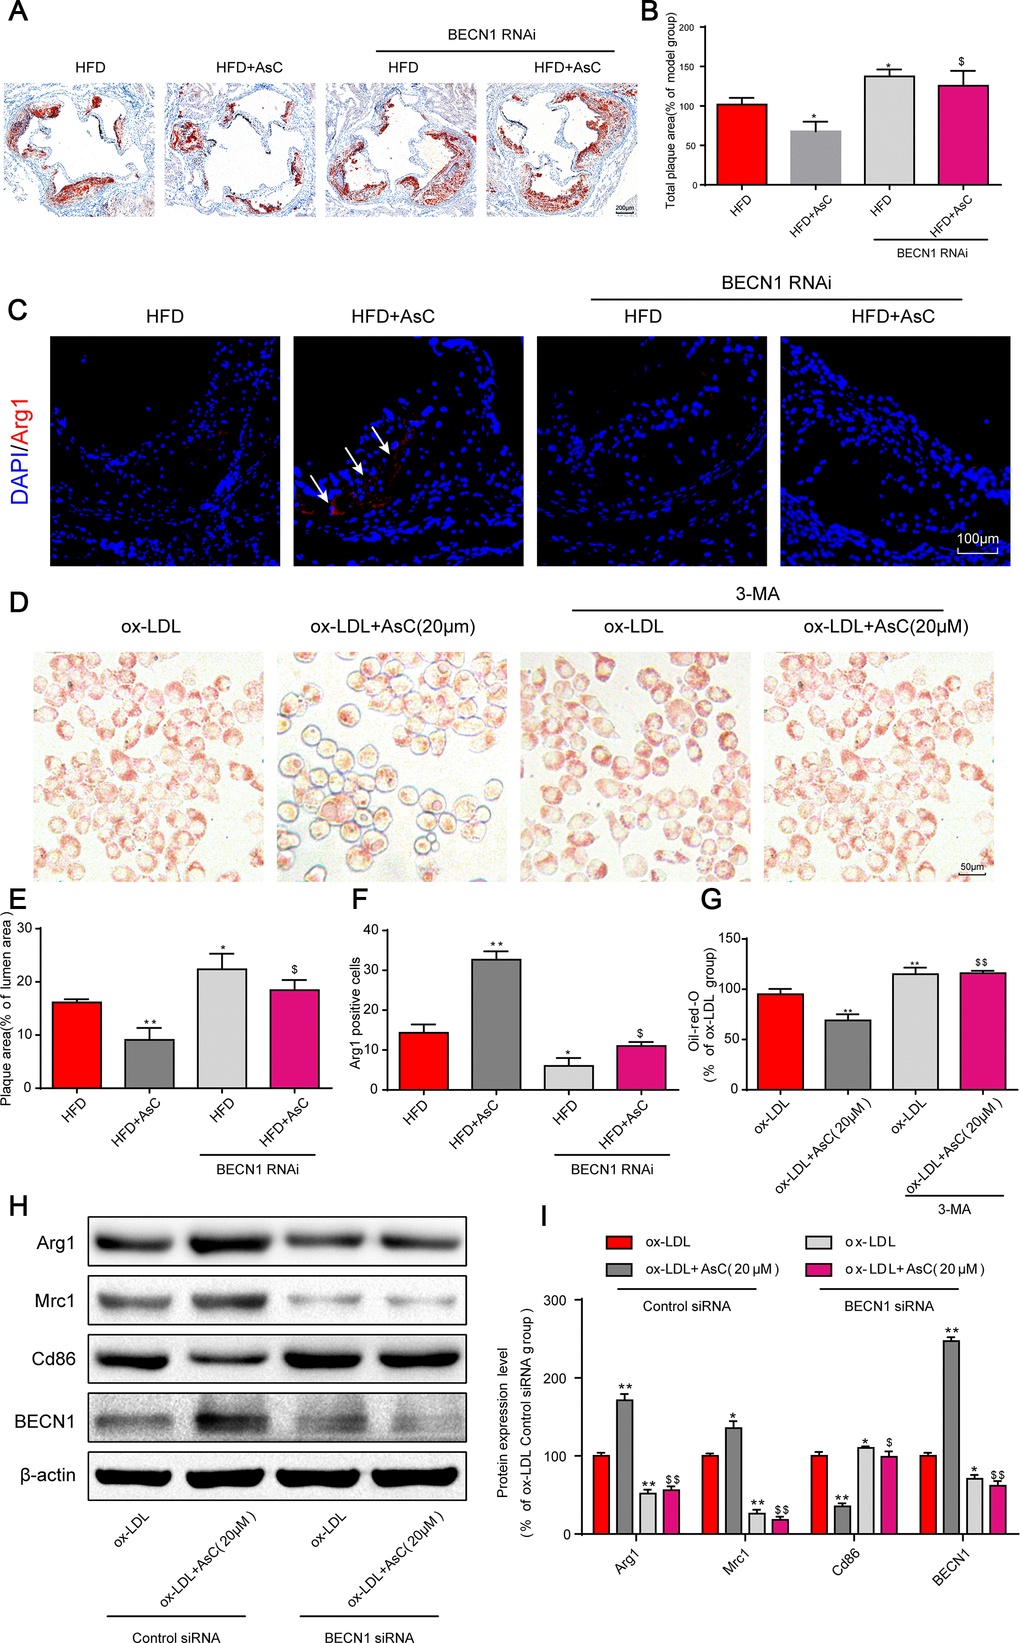 Autophagy inhibition abolished AsC-mediated antiatherosclerotic effects and macrophage polarization. All mice were fed a HFD in the presence or absence of AsC (20 mg·kg-1·day-1, i.g.) for 4 weeks. In the in vitro assay, RAW264.7 cells were pretreated with 3-MA (5 mM) for 2 h, treated with AsC (20 μM) for 12 h, and then exposed to ox-LDL for another 24 h. (A) Representative images of oil red O staining of the aortic root. (B) Quantification of the total plaque area. (C) Dual immunofluorescence staining forArg1 (red) and DAPI (blue) in lesions in the aortic root. (D) Representative images of oil red O staining of ox-LDL-treated RAW264.7 cells. (E) The percentage of plaque area relative to lumen area. (F) Quantification of relative fluorescence intensity. (G) Quantification of oil red O staining, as detected by a microplate reader. (H) Representative photographs of Arg1, Mrc1, Cd86 and BECN1 expression, as evaluated by western blot analysis. (I) Statistical results of Mrc1, Cd86 and Arg1 expression levels compared with those in the ox-LDL-treated group. The data are presented as the means ± SDs (n = 5). *P **P vs. the model group; $P $$P vs. the ox-LDL and AsC group.